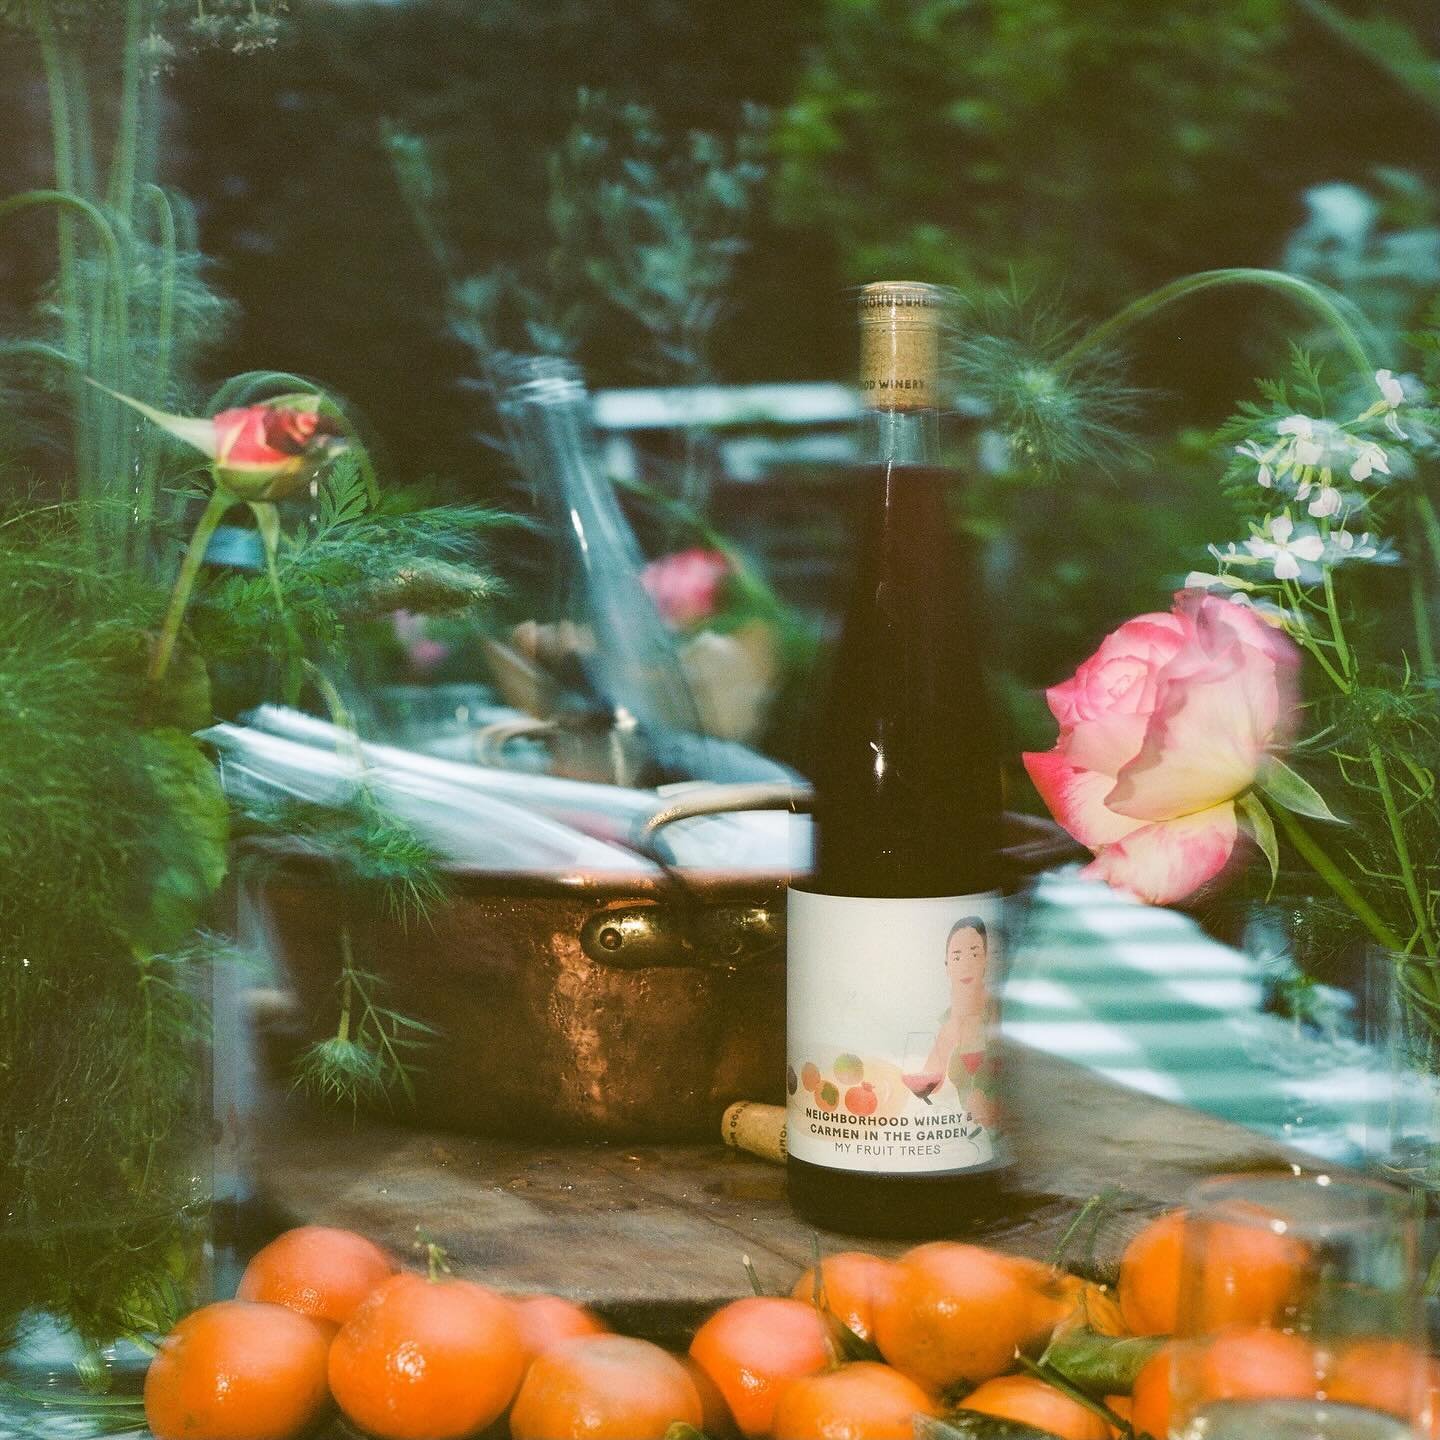 My Fruit Trues is certainly the most interesting wine we make each year! The inspiration starts in the middle of Carmen&rsquo;s garden-farm&mdash; a mulberry off a hanging branch, the chamomile bush in the wind, the orange blossoms perfuming, butterf